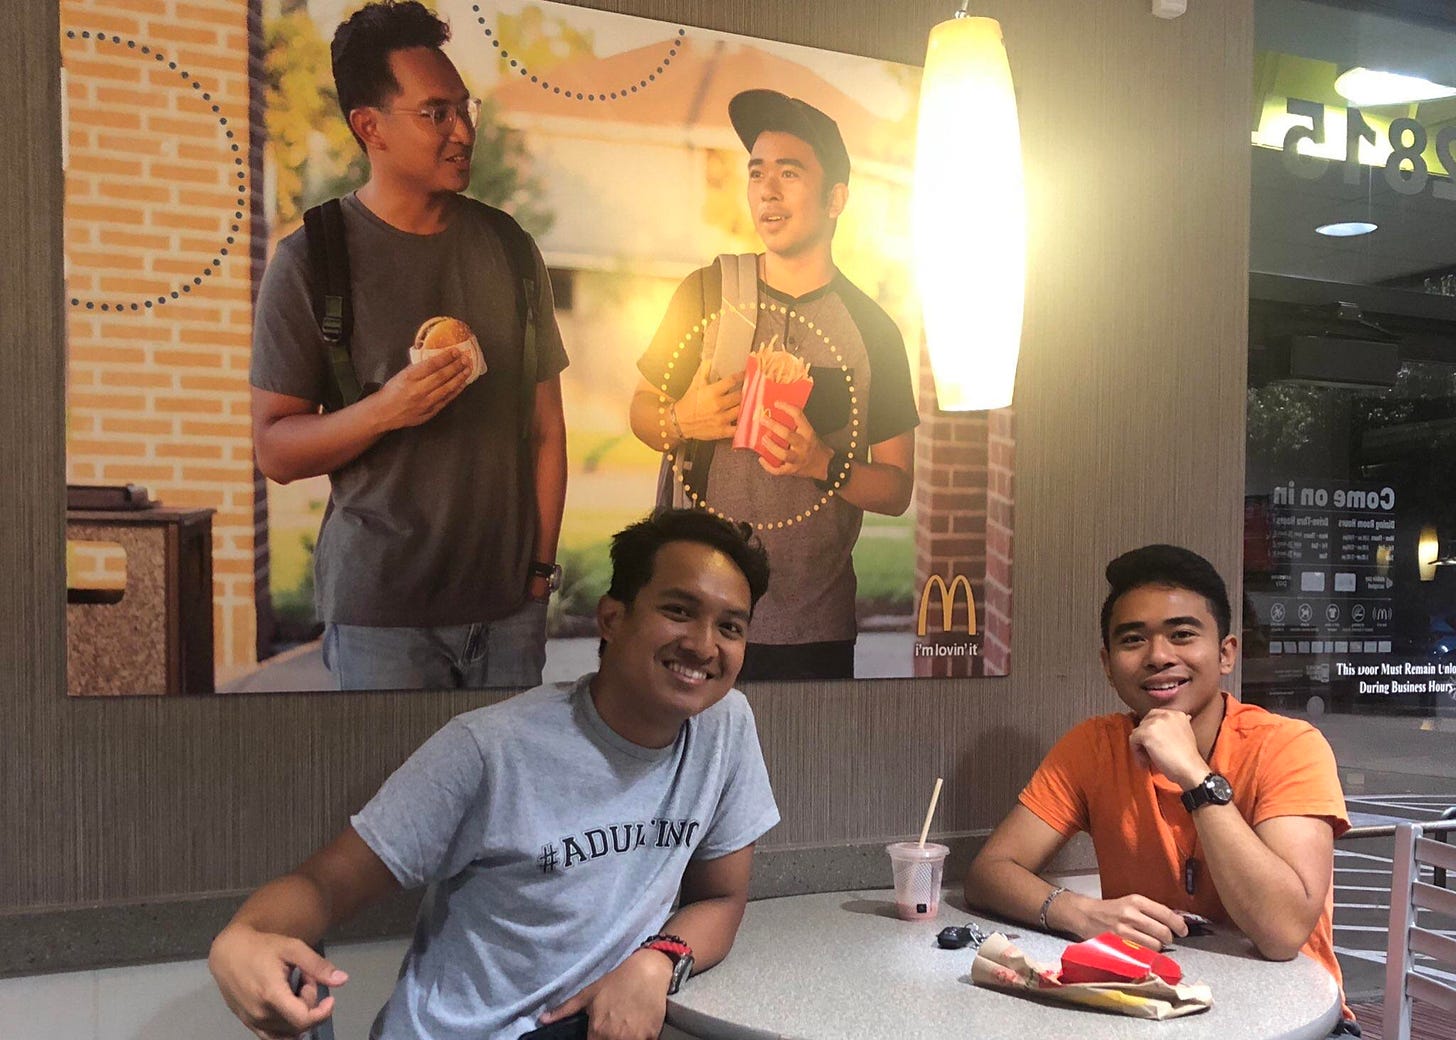 A poster of two men with McDonalds food. Sitting in front of the poster are the same two men in McDonalds